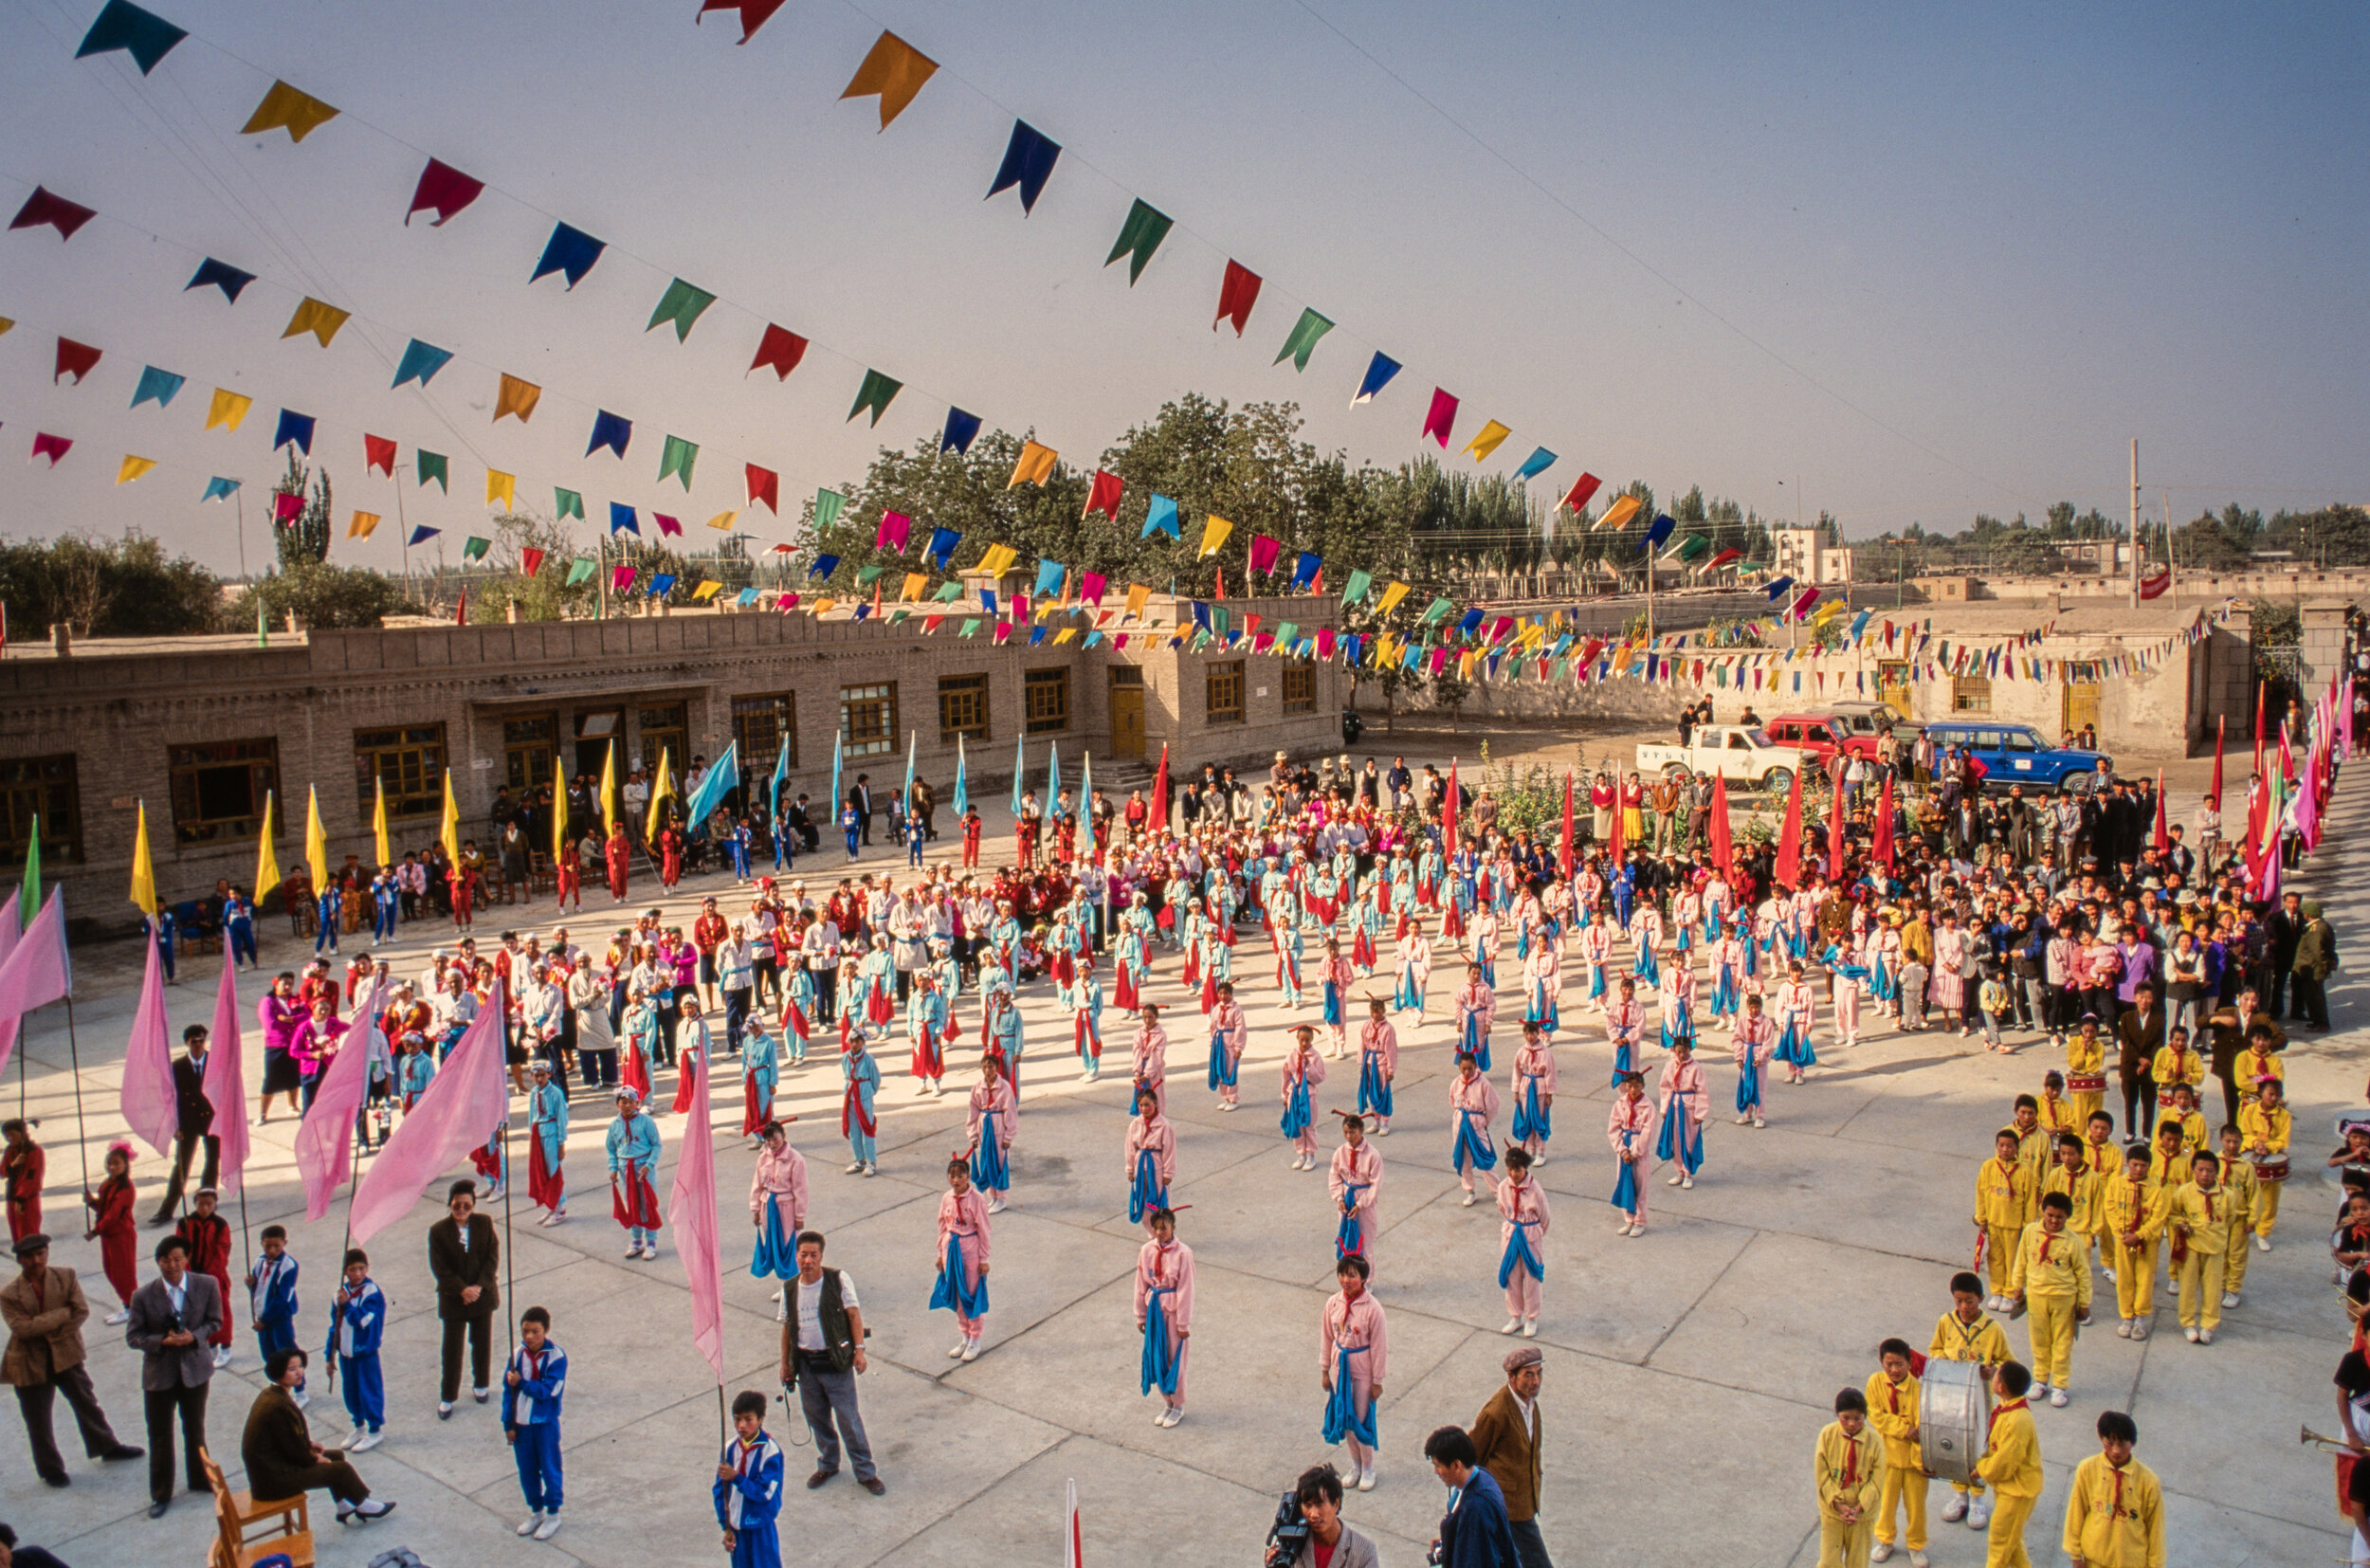  The community threw a huge celebration marking the completion of the first crossing of the Taklamakan.  